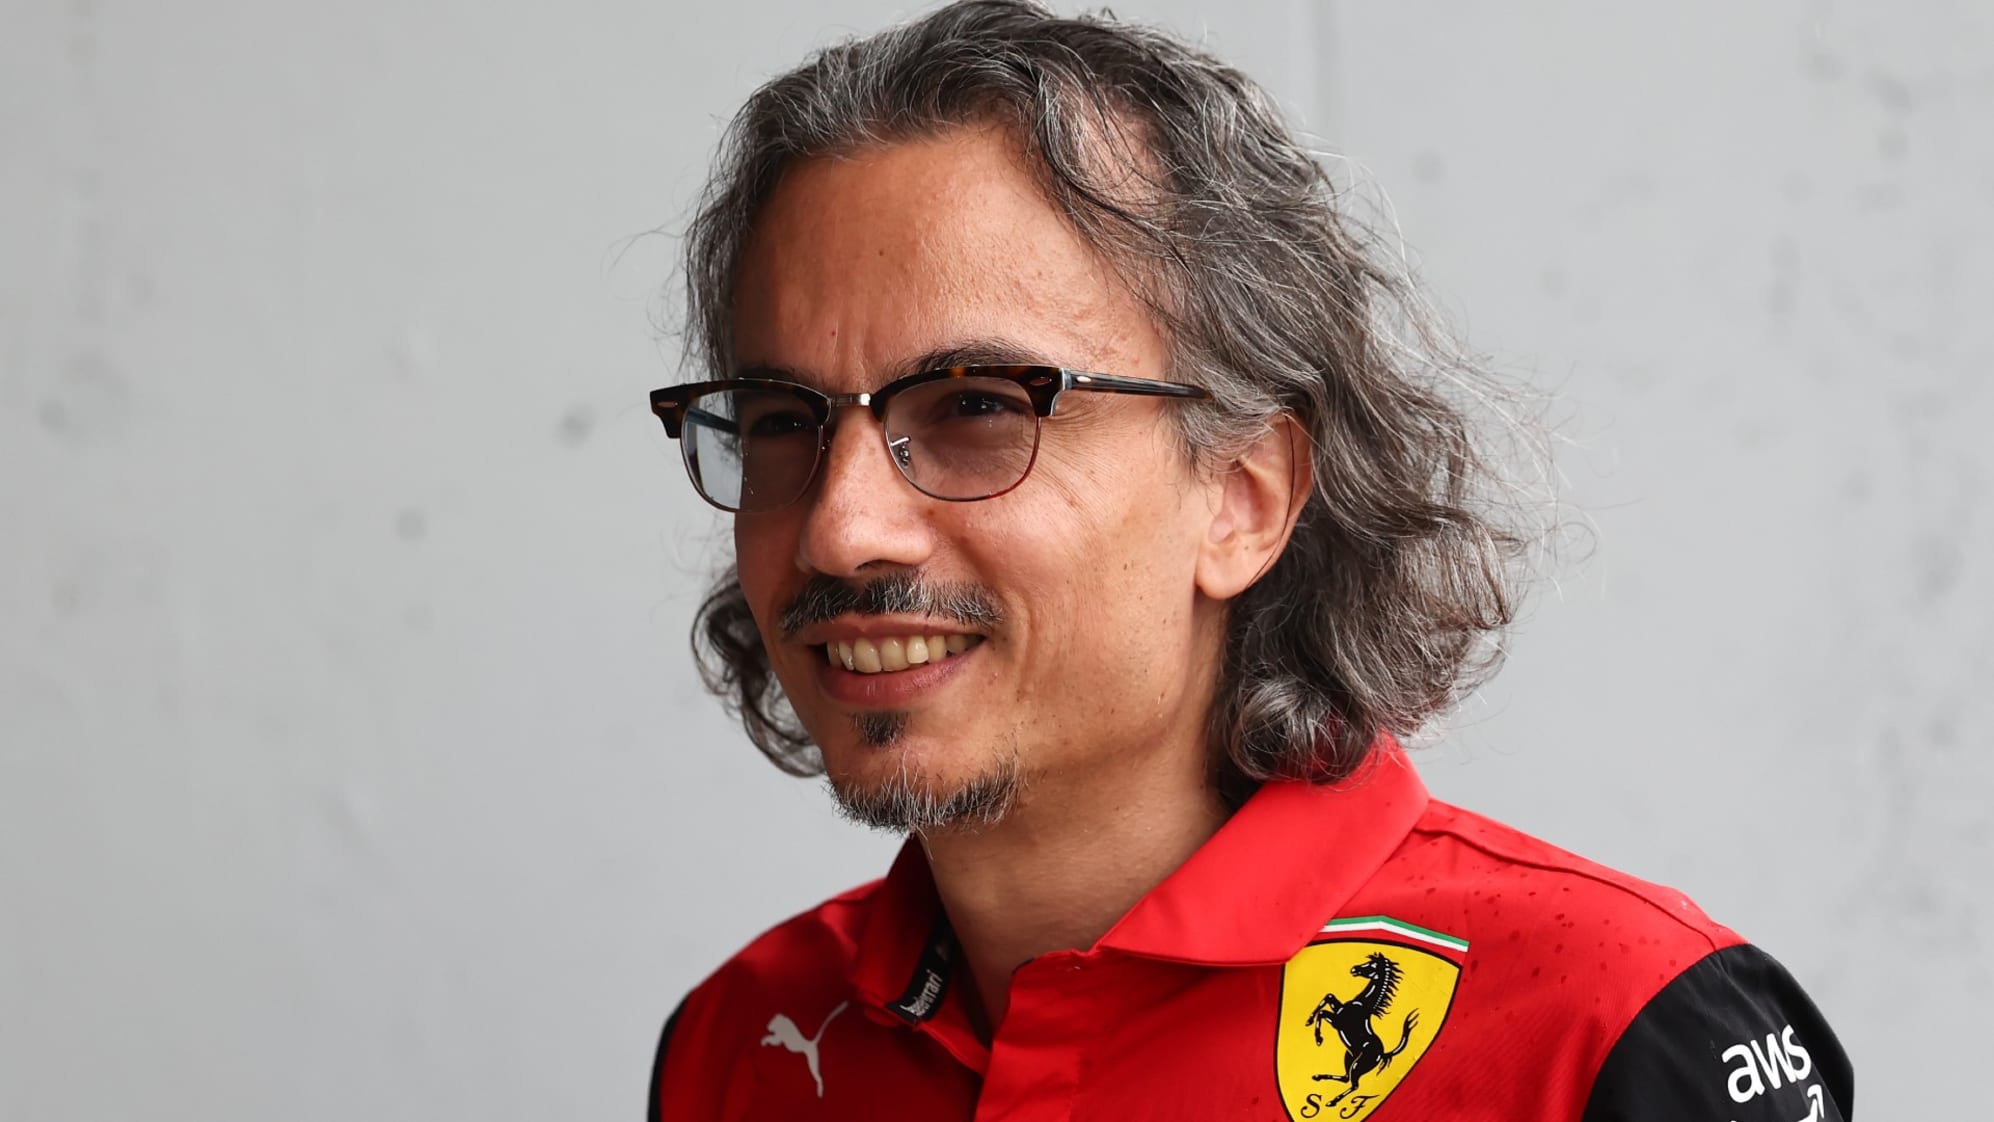 Ferrari's Laurent Mekies will join AlphaTauri later this year as the turnover in Ferrari personnel continues.